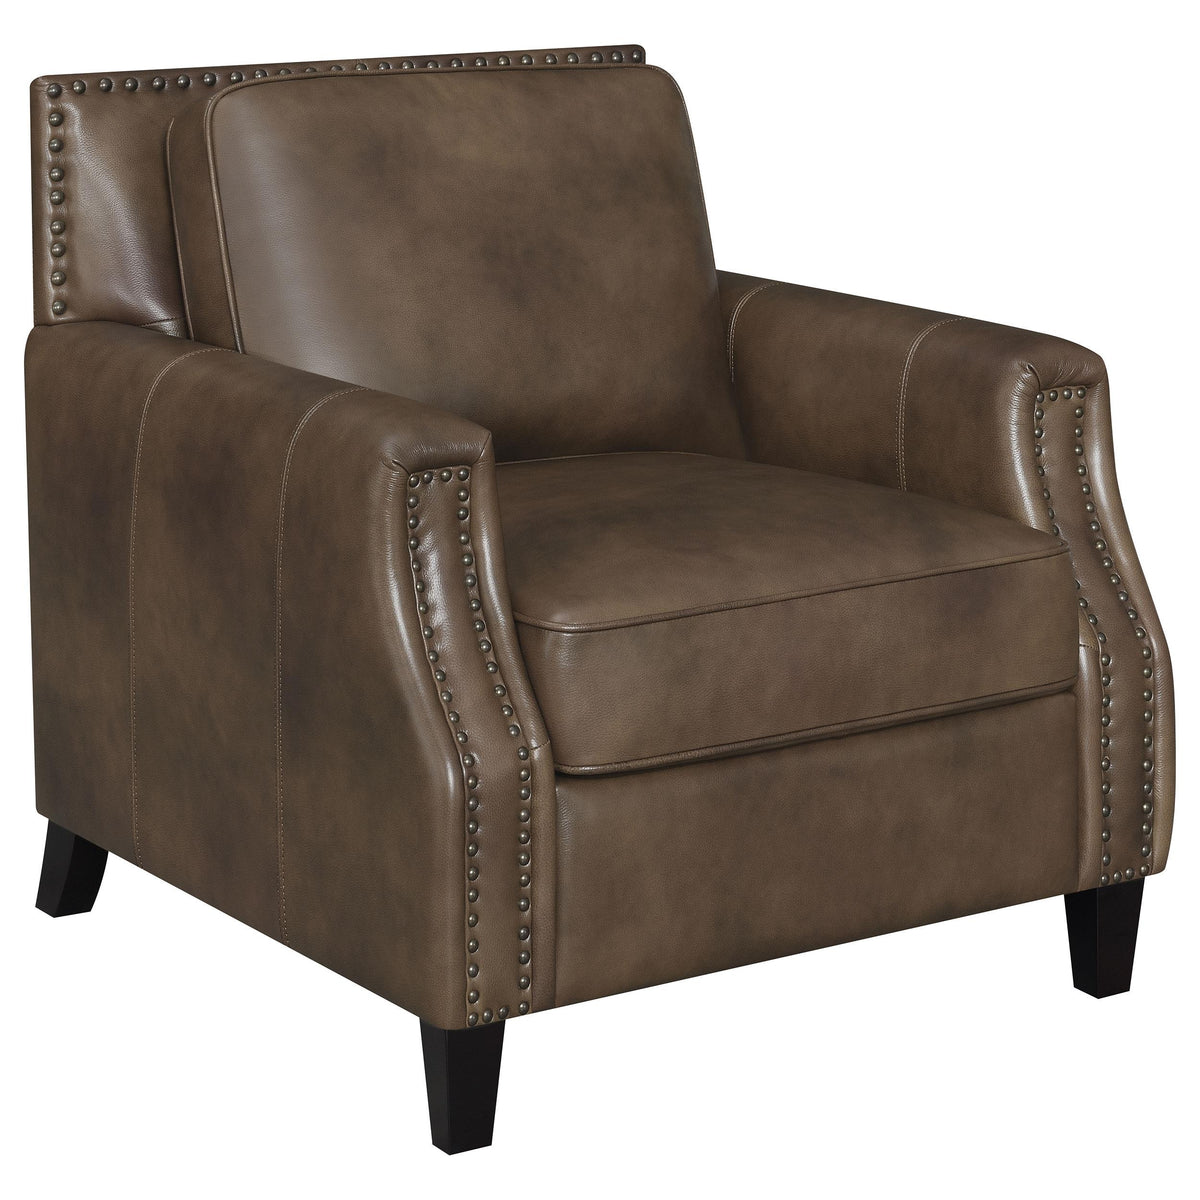 Leaton Upholstered Recessed Arm Chair Brown Sugar  Las Vegas Furniture Stores